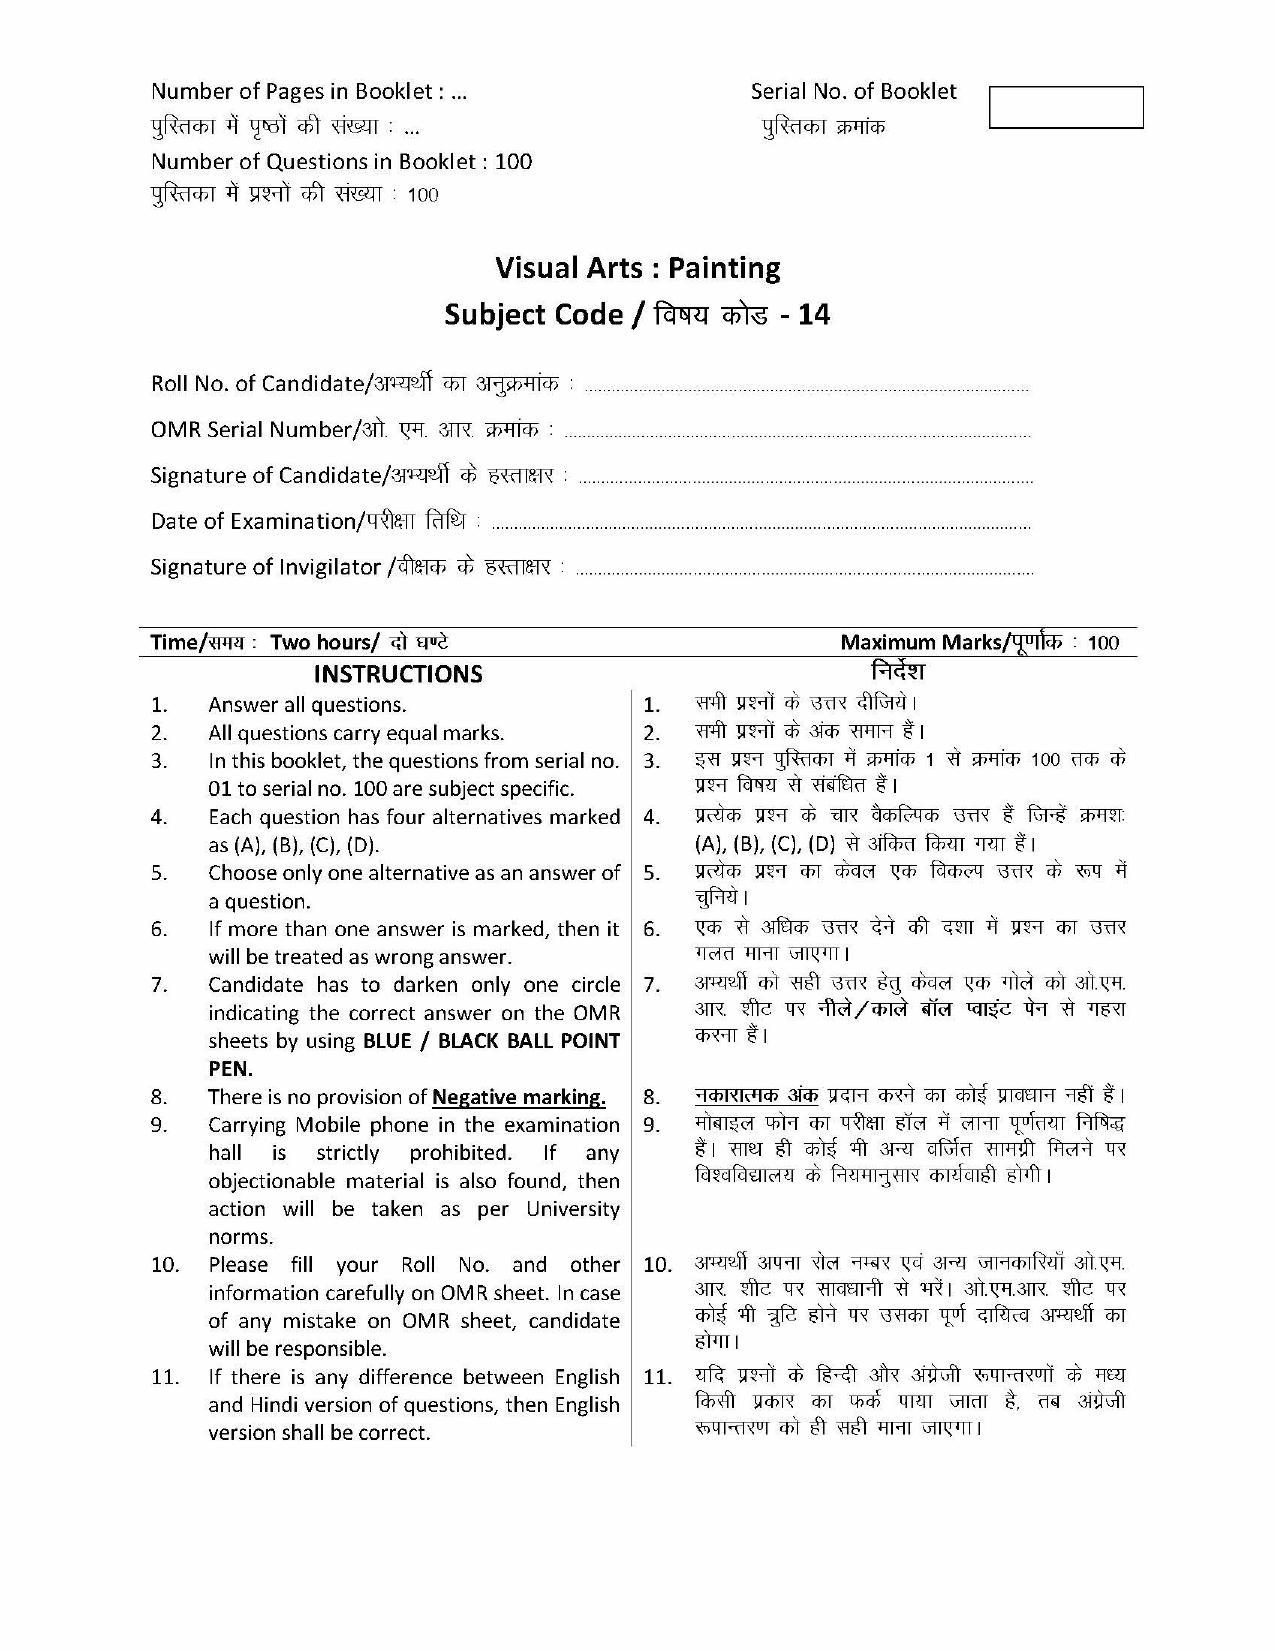 URATPG Visual Arts Painting Sample Question Paper 2018 - Page 1